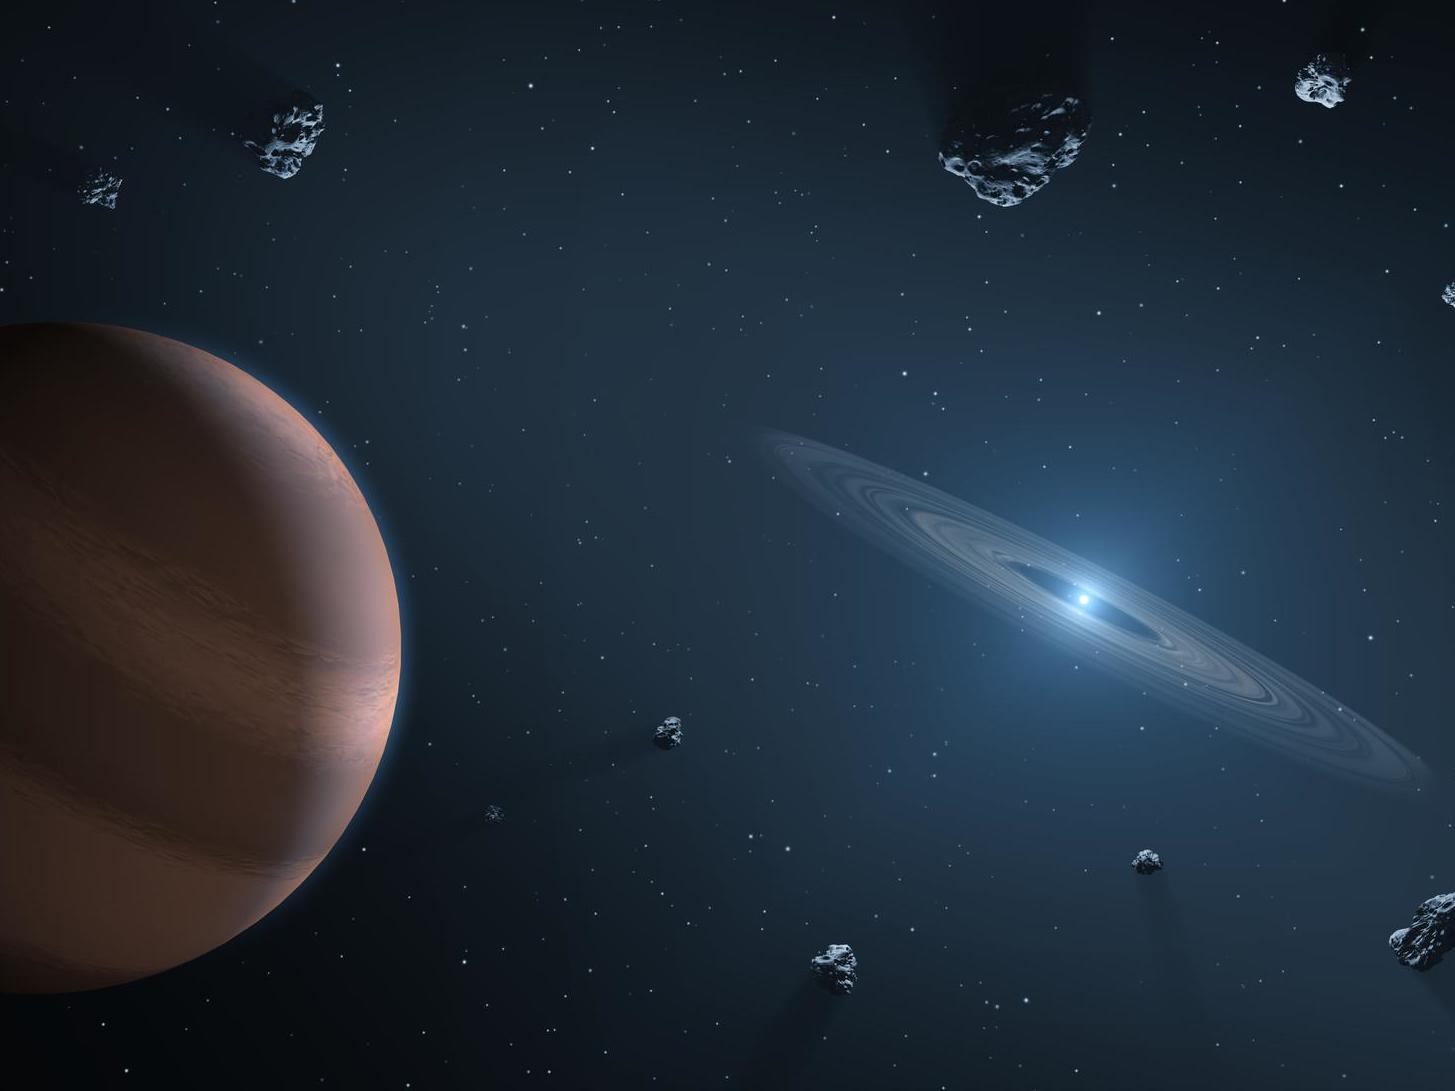 Artists impression of white dwarf star (on right) showing dust disc, and surrounding planetary bodies